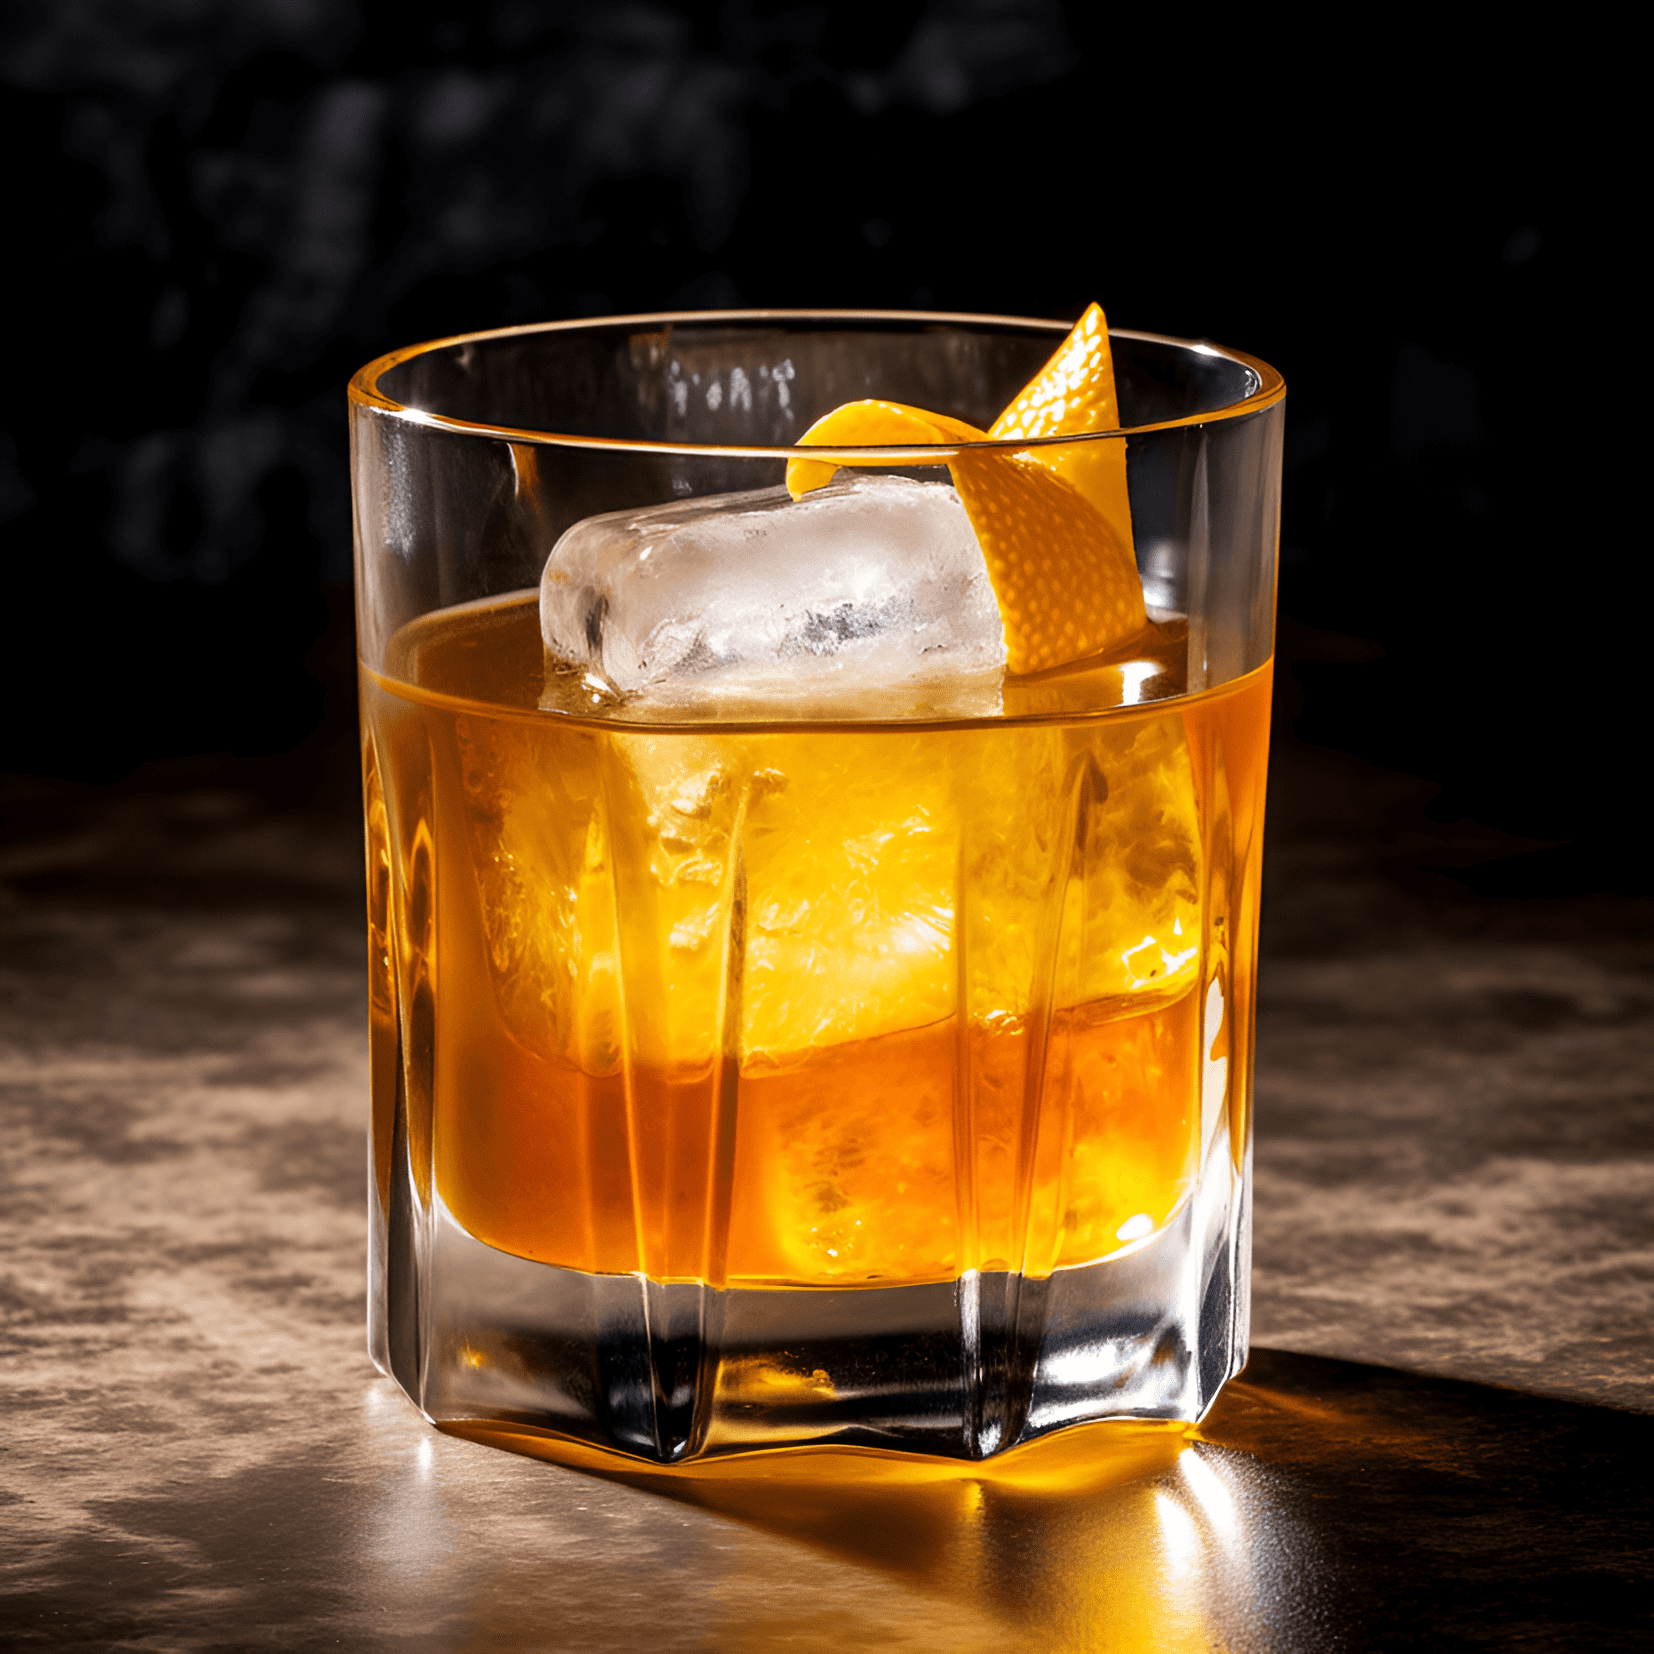 Nixon Cocktail Recipe - The Nixon cocktail has a balanced taste, with a combination of sweet, sour, and slightly bitter flavors. The bourbon provides a rich, smooth base, while the lemon juice adds a refreshing tartness. The orgeat syrup lends a subtle sweetness and nutty undertones.